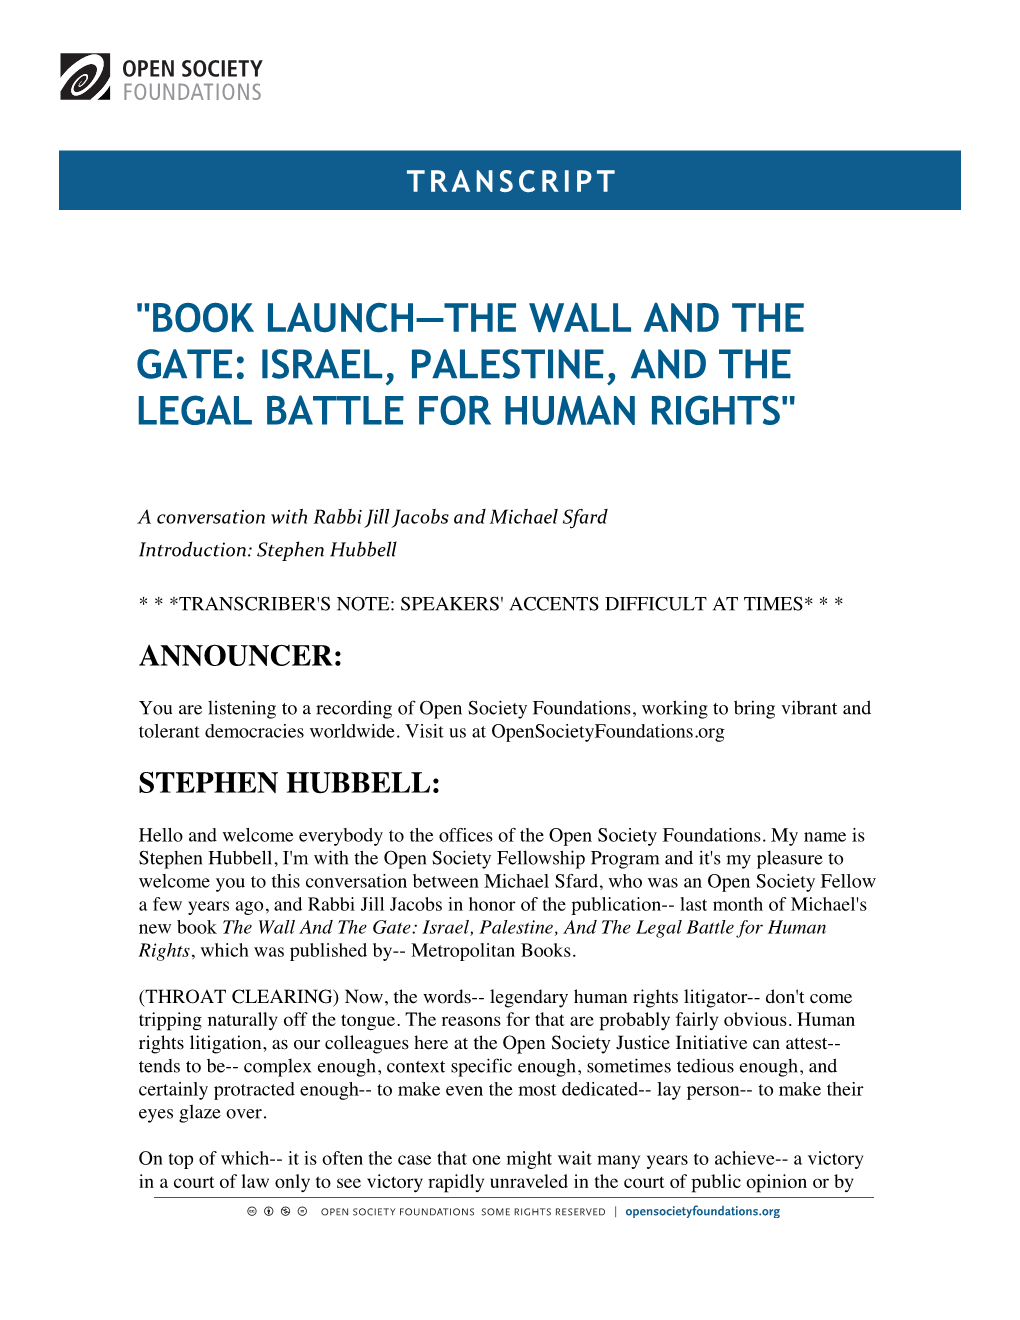 Book Launch—The Wall and the Gate: Israel, Palestine, and the Legal Battle for Human Rights"